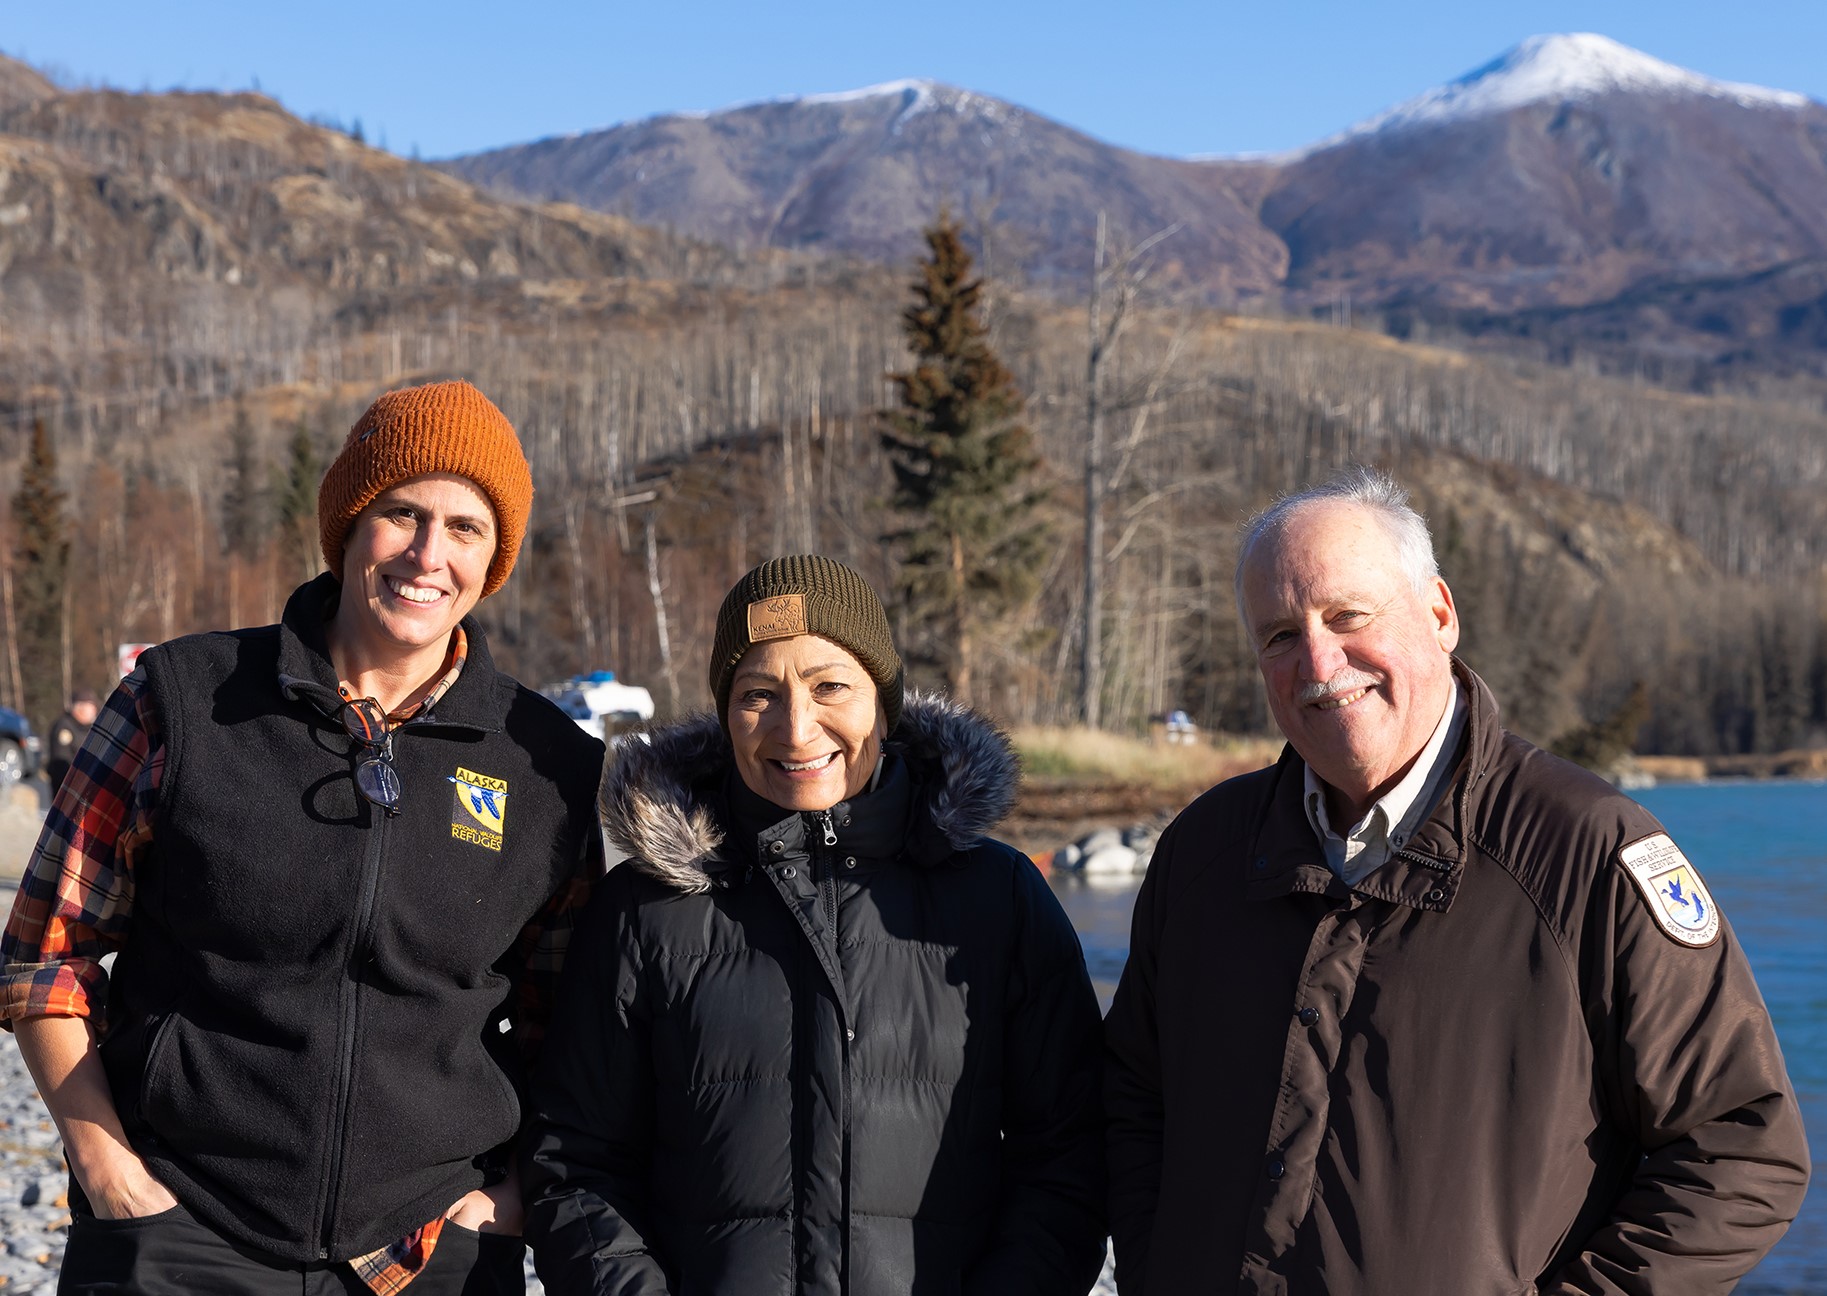 Sara Boario, USFWS Alaska Regional Director (left), and Andy Loranger, Kenai Refuge Manager, hosted the Secretary during her visit to the Kenai. “It means so much that the Secretary takes time to meet with us when she visits Alaska," Boario said. "On each of her three trips she has prioritized time to listen and learn from our employees and share her support and encouragement for our work.”  pc Lisa Hupp/USFWS